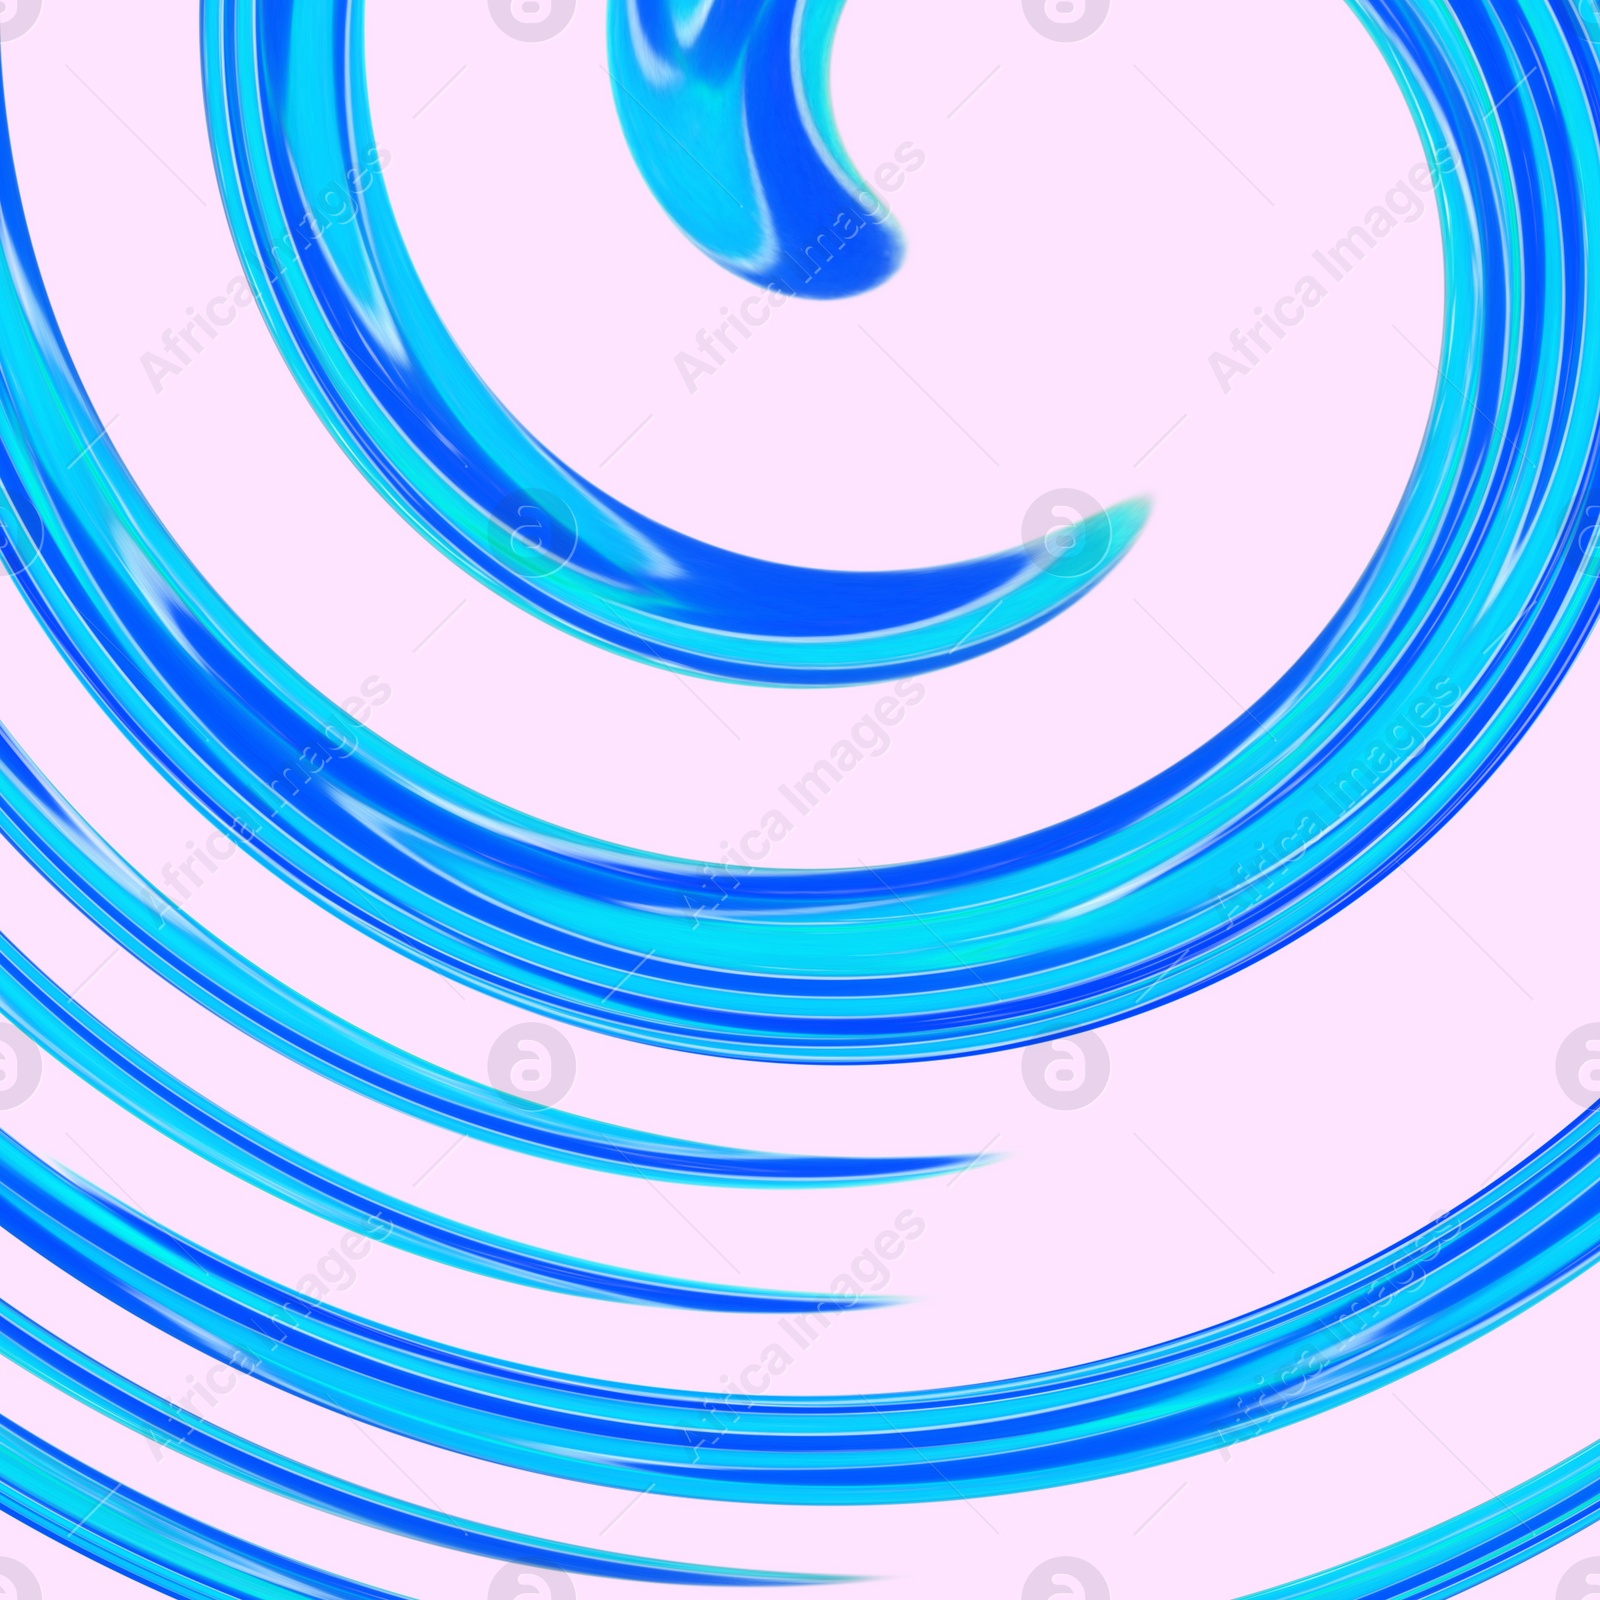 Image of Twisted hard candy on light pale pink background, spiral effect